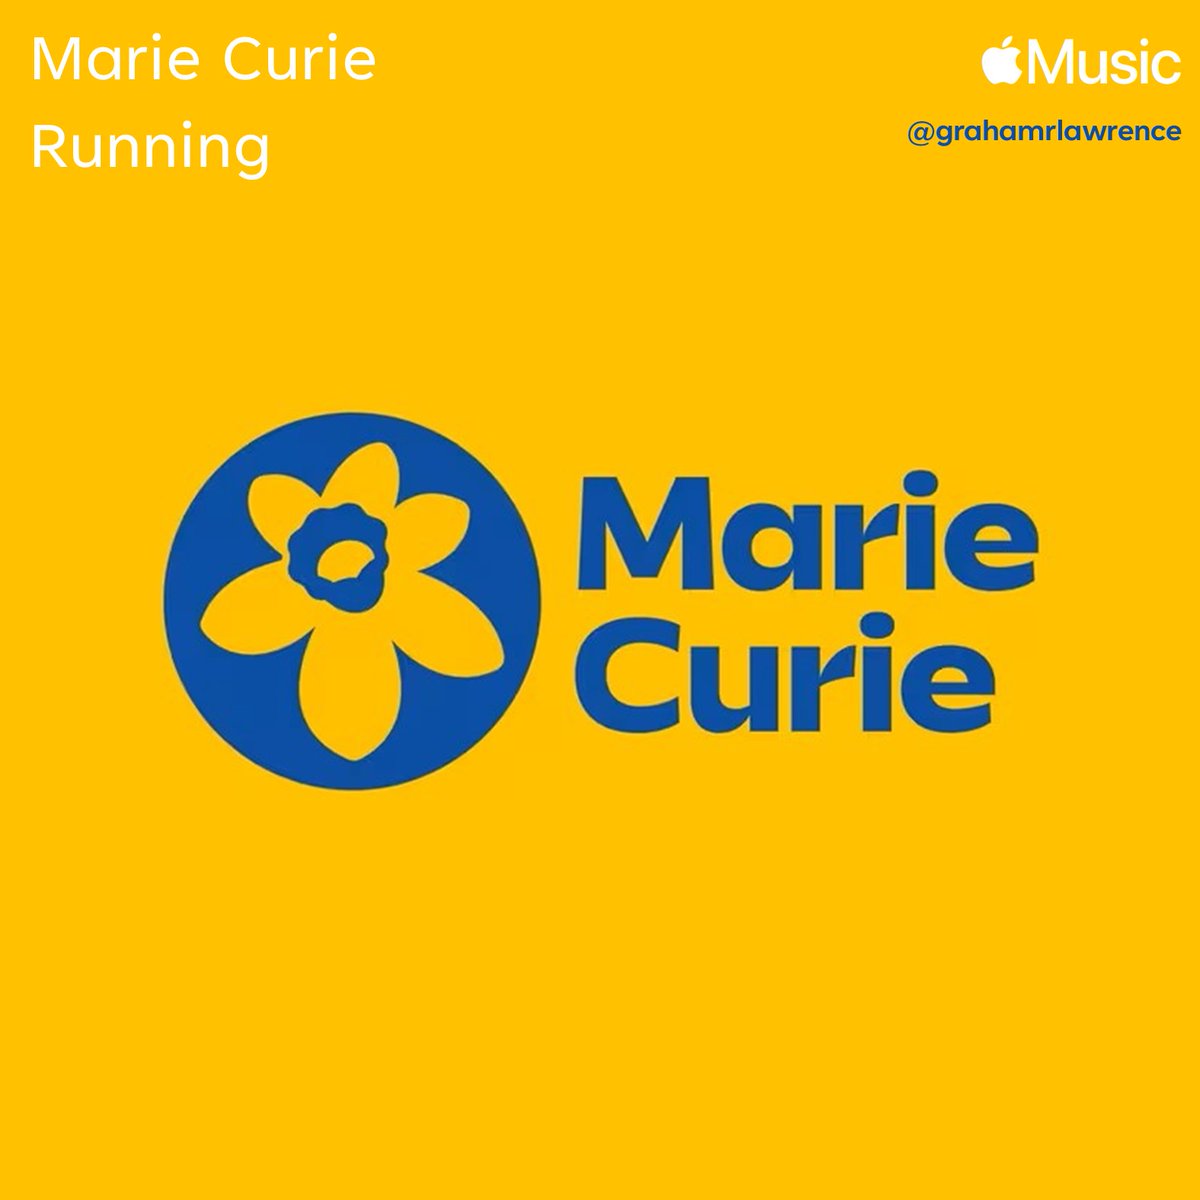 Running Playlist | 'Running 80K in May 2024 for Marie Curie': music.apple.com/gb/playlist/ma…

🎵Burning Down The House🎵Tom Jones | The Cardigans

Fundraiser: bio.link/grahamrlawrence

#MarieCurie #TeamMarieCurie #Fundraiser #Running #GrahamsRunForMarieCurie #Playlist #TomJones